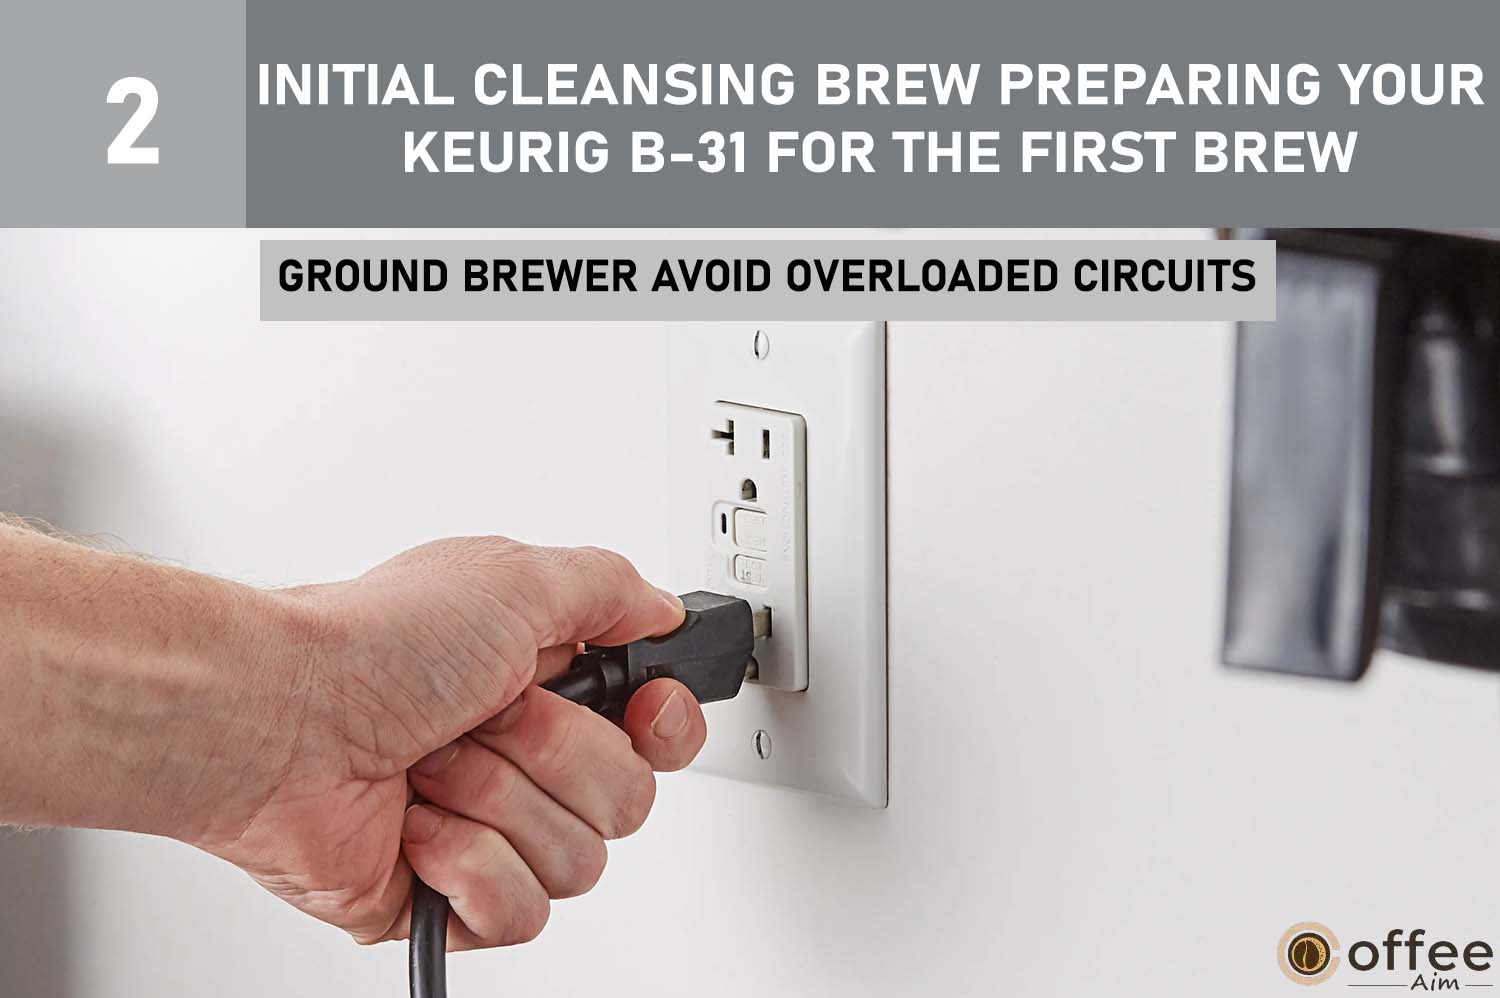 This image illustrates the process of 'ground brewer avoid overload circuits' as part of the initial cleansing brew, a crucial step in preparing your Keurig B-31 for its first brew.